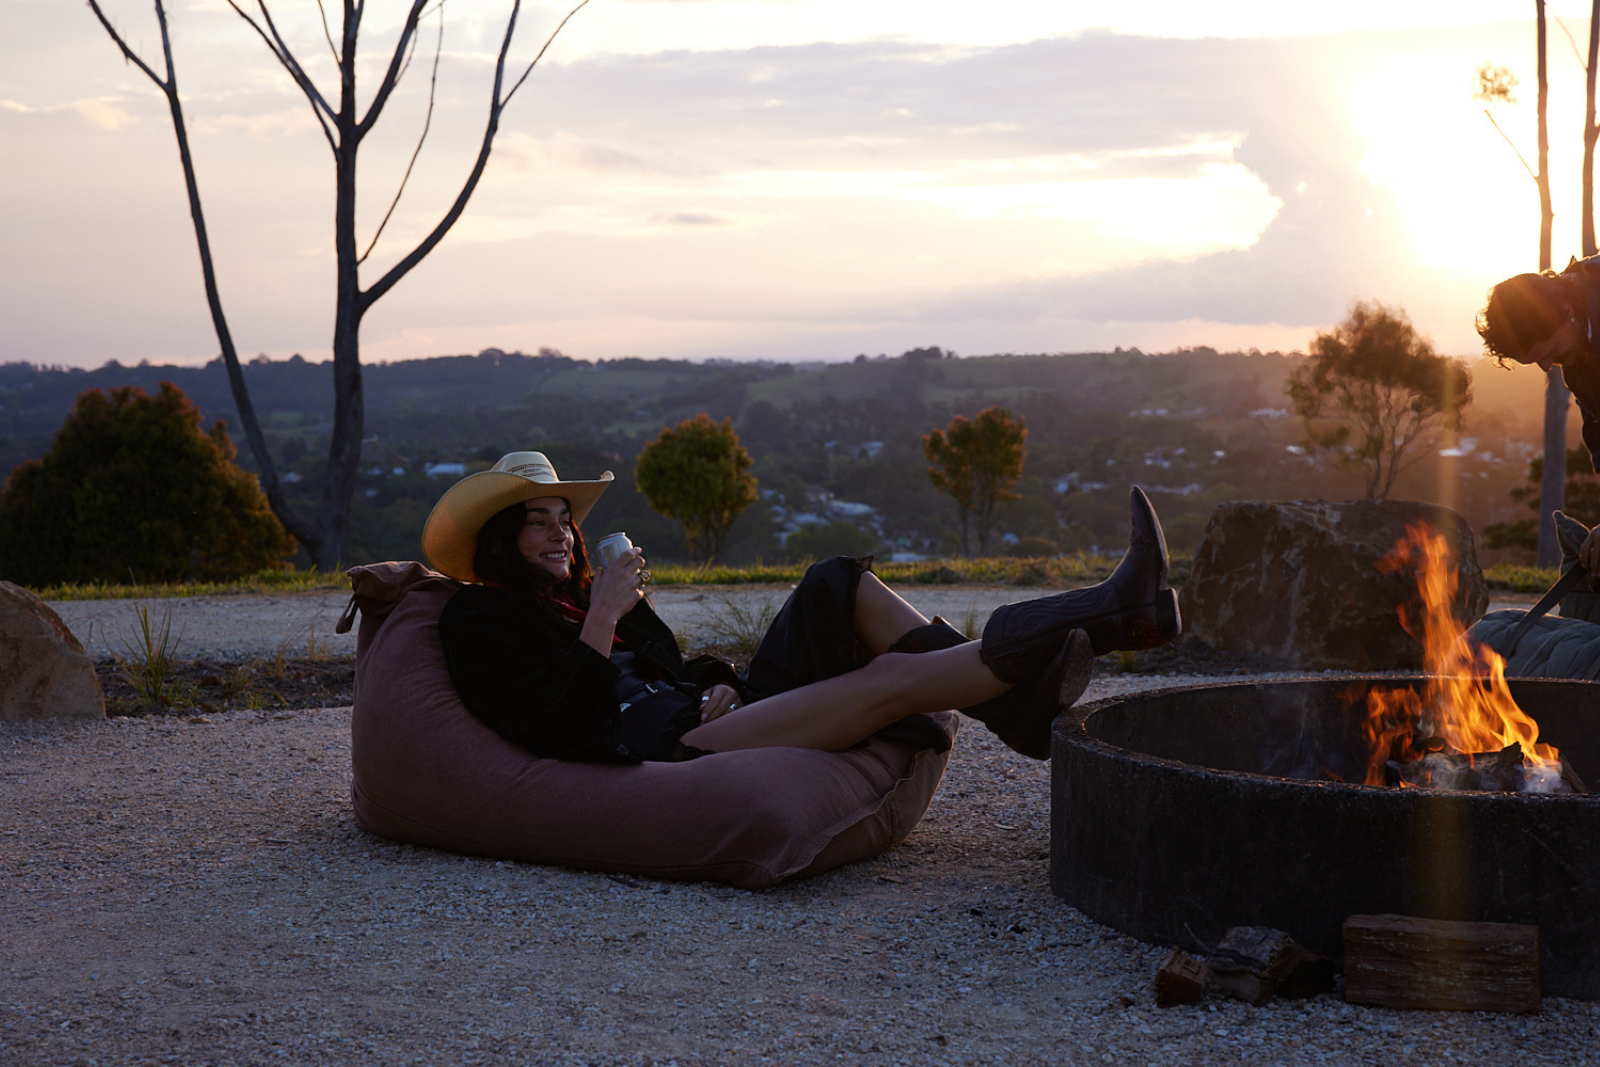 Woman in 20's laid back on bean bag by outdoor fire pit with sunset in background